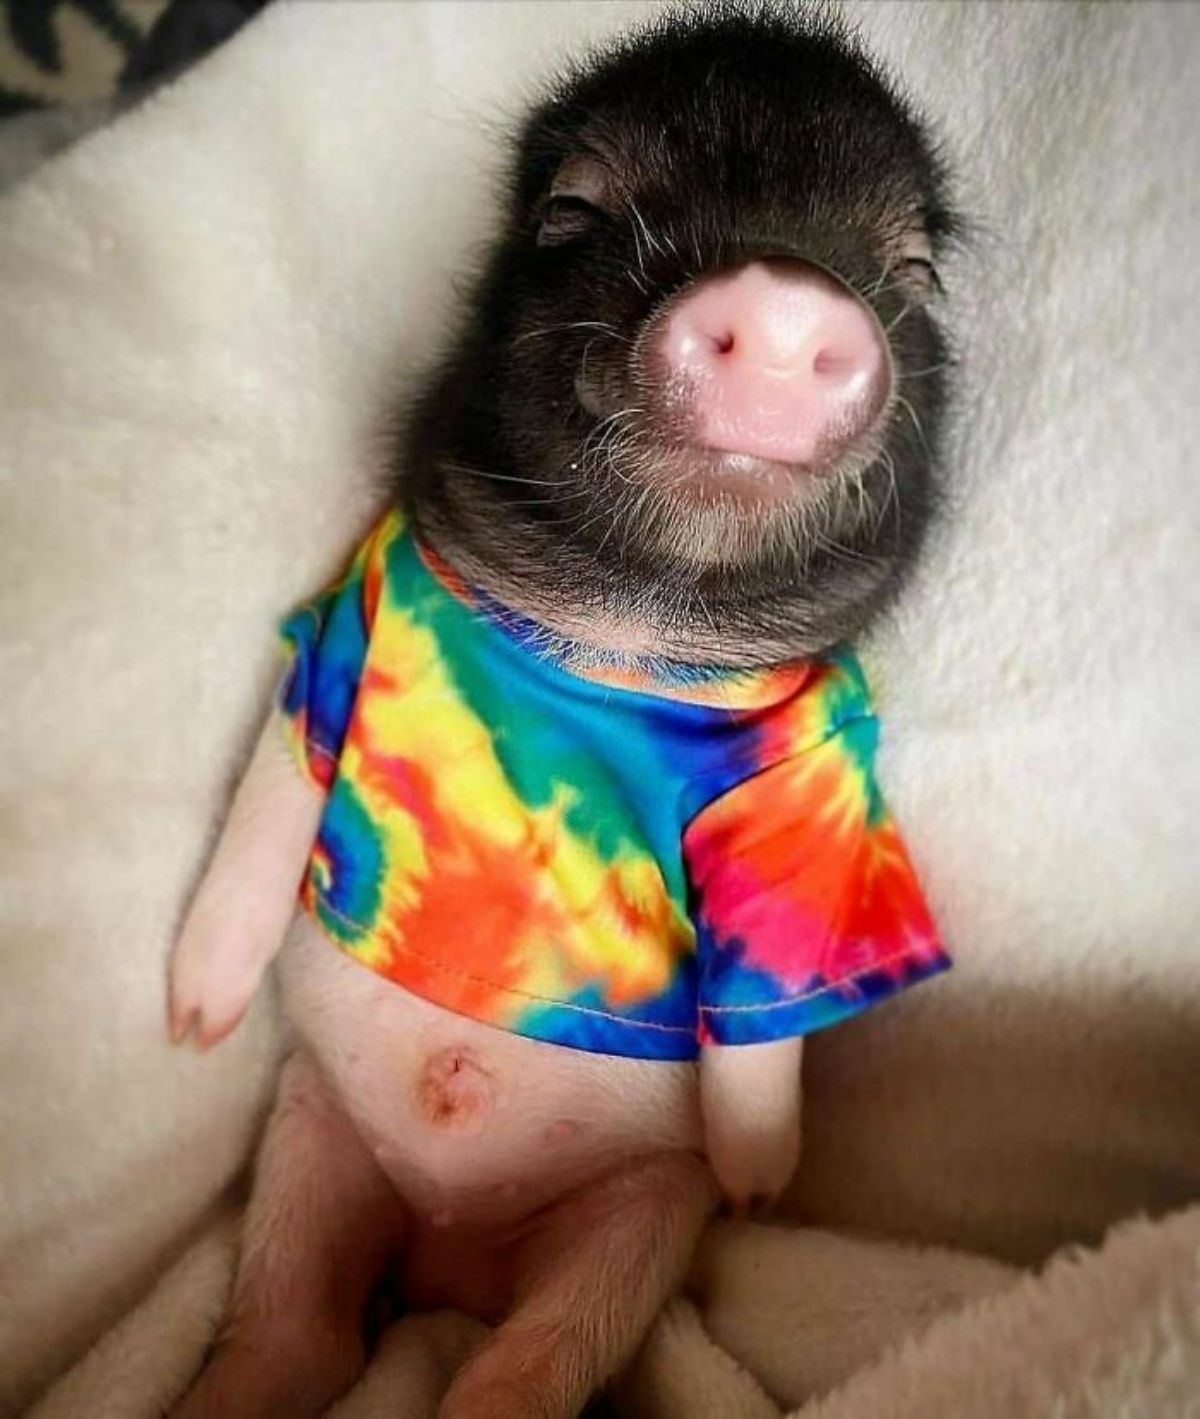 black pig sleeping belly up on a white blanket wearing a rainbow tie dye shirt